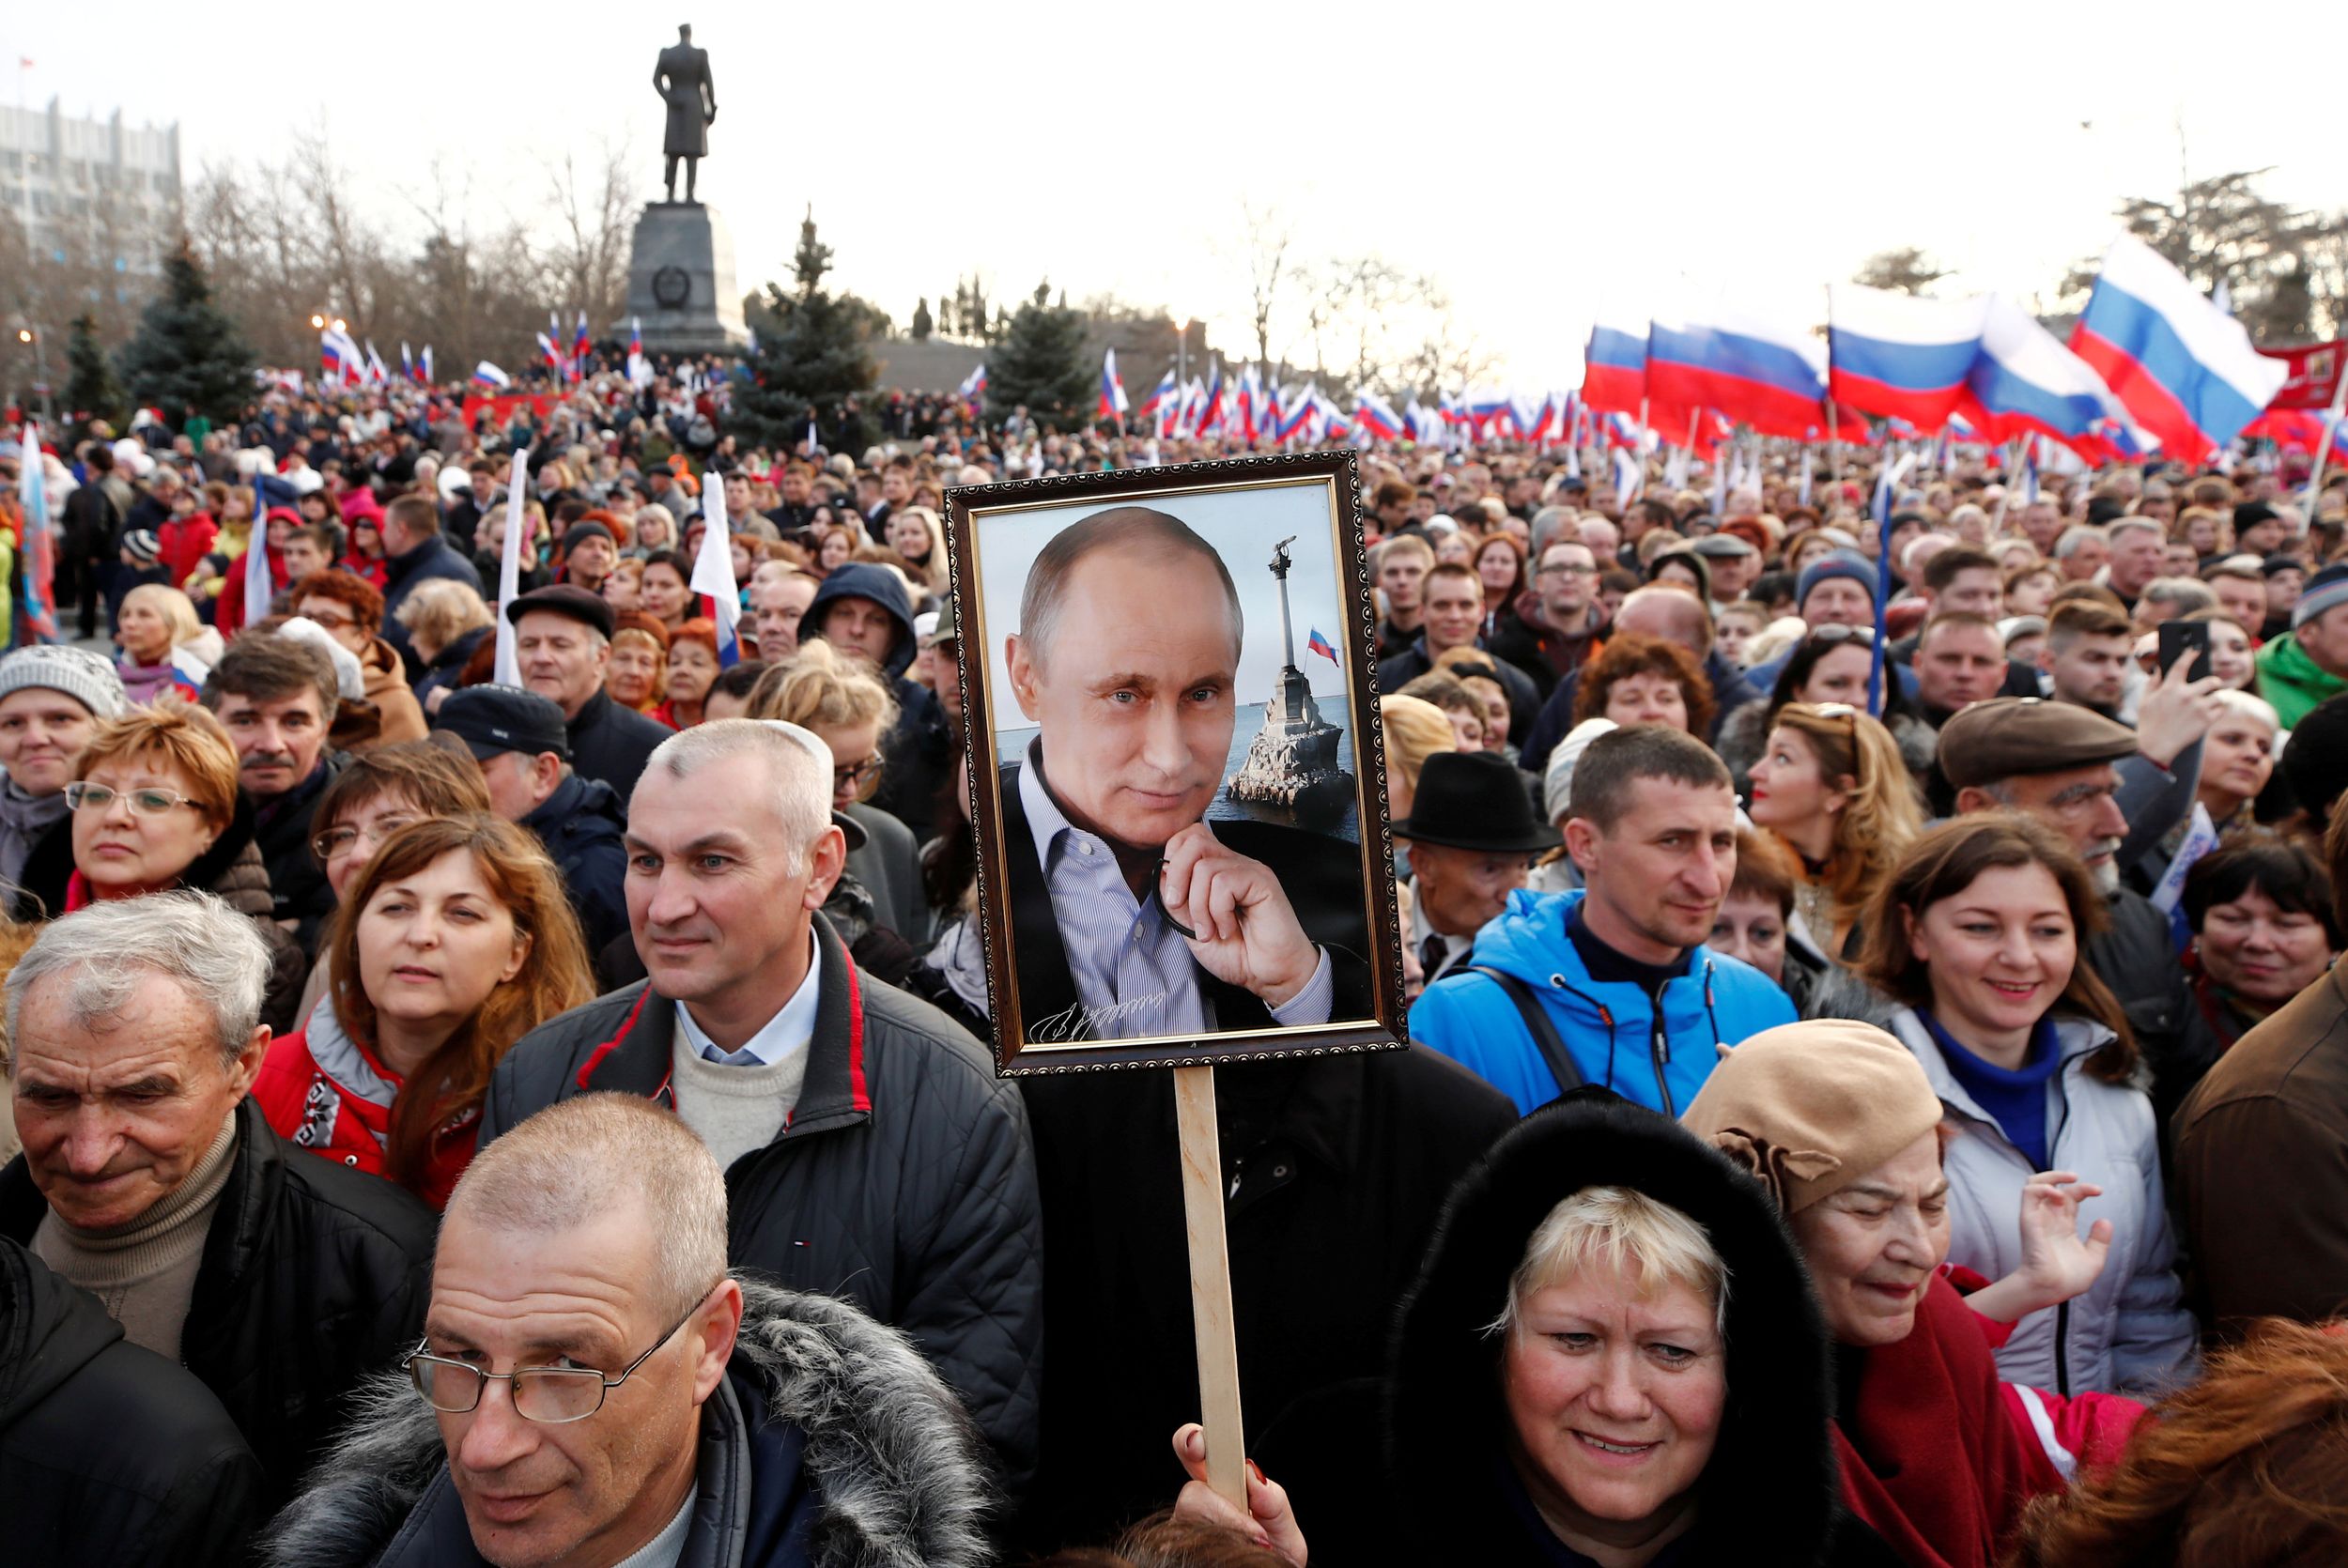 What We’re Watching: Russians let Putin stay, Syria donors pledge, US & China battle over tech